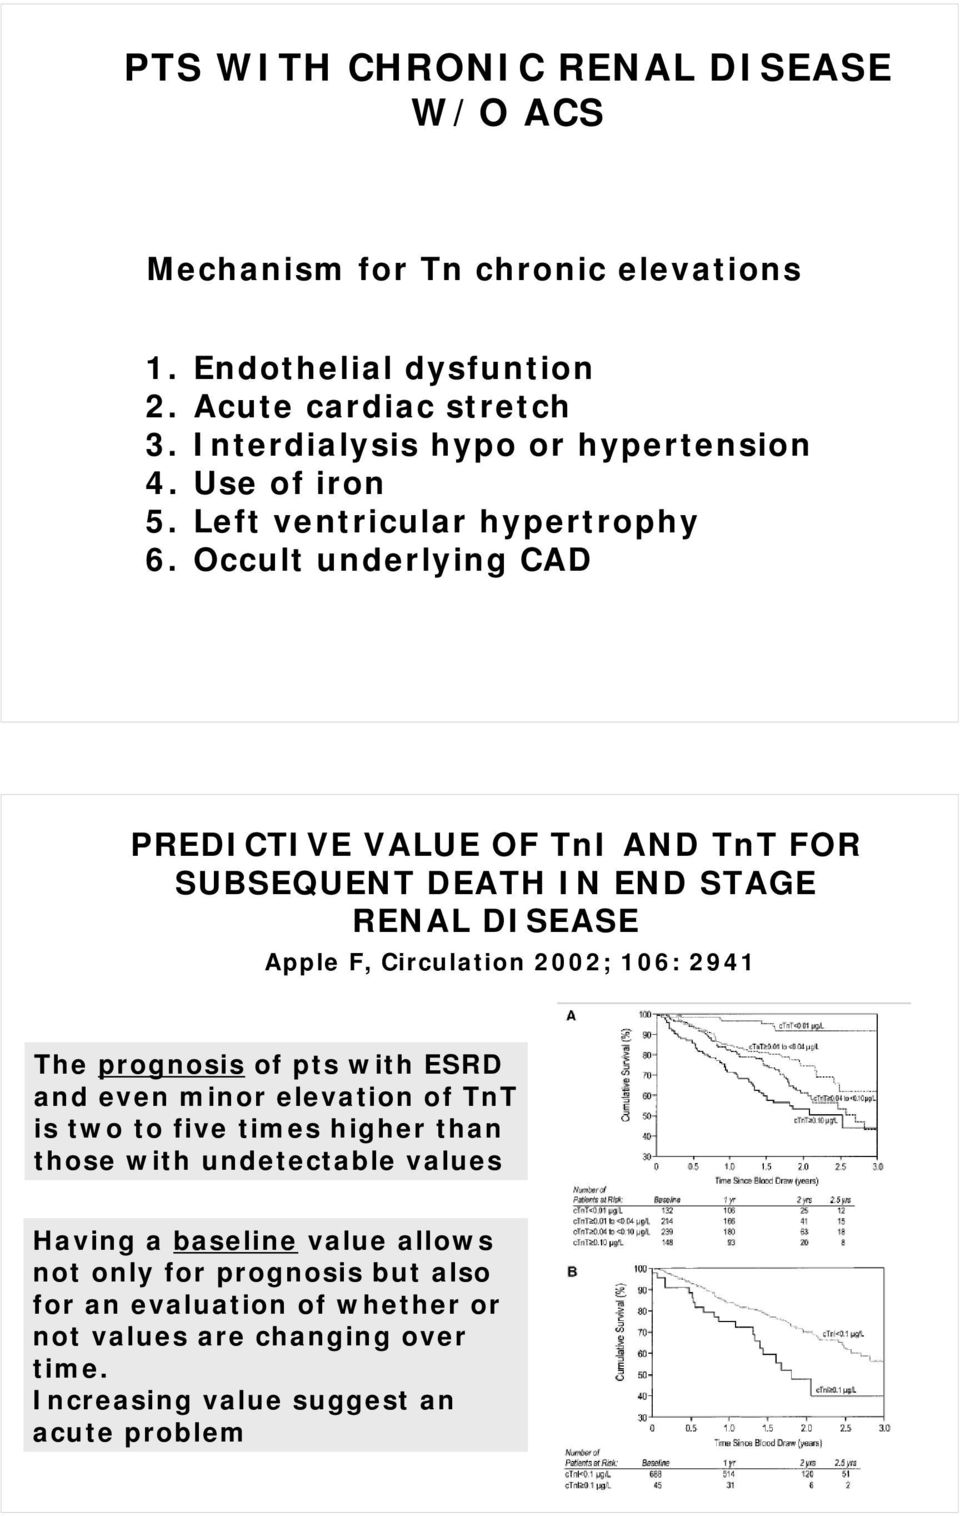 Occult underlying CAD PREDICTIVE VALUE OF TnI AND TnT FOR SUBSEQUENT DEATH IN END STAGE RENAL DISEASE Apple F, Circulation 2002; 106: 2941 The prognosis of pts